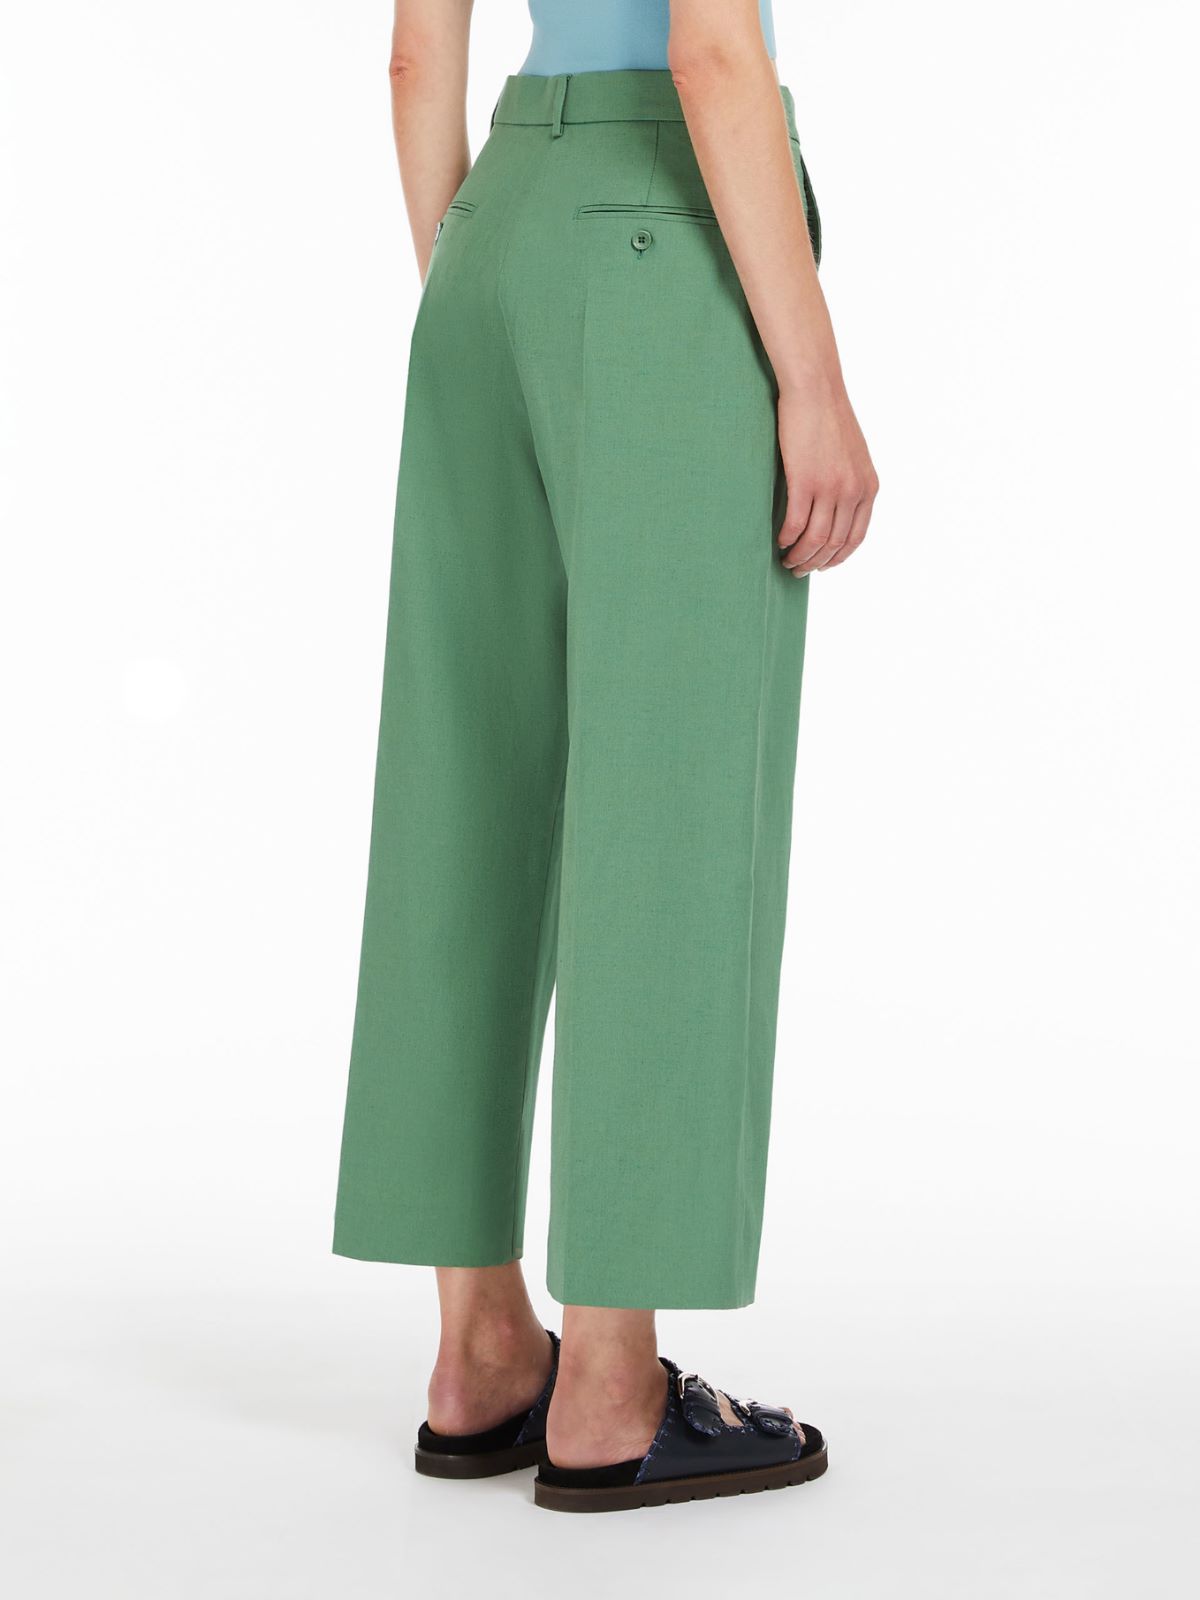 Cotton and linen canvas trousers, green | Weekend Max Mara